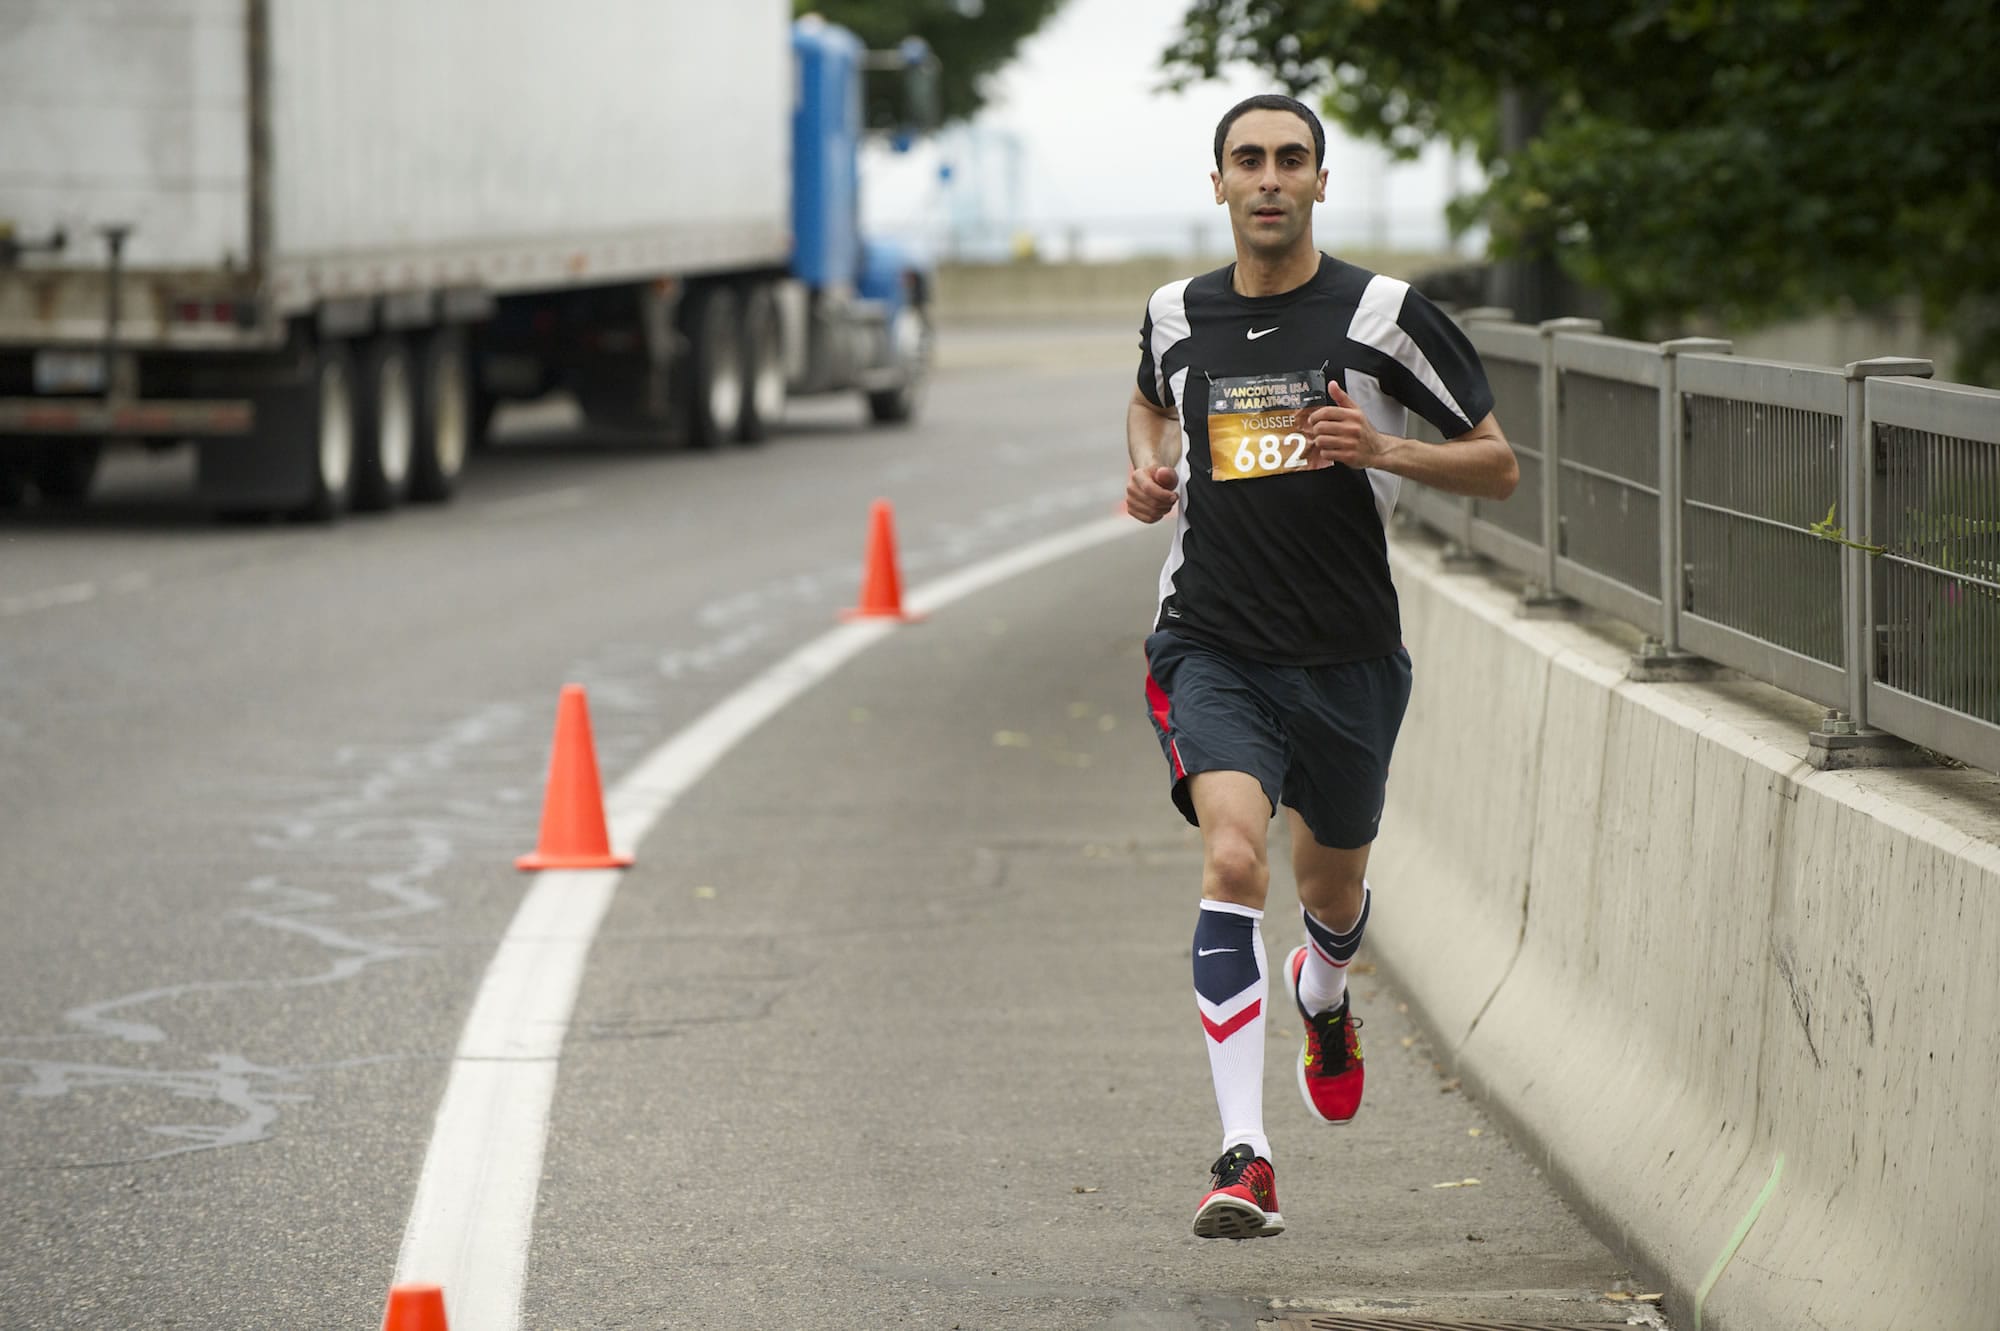 Youssef Zizari of Vancouver leads the 2013 Vancouver USA Marathon at mile 14.